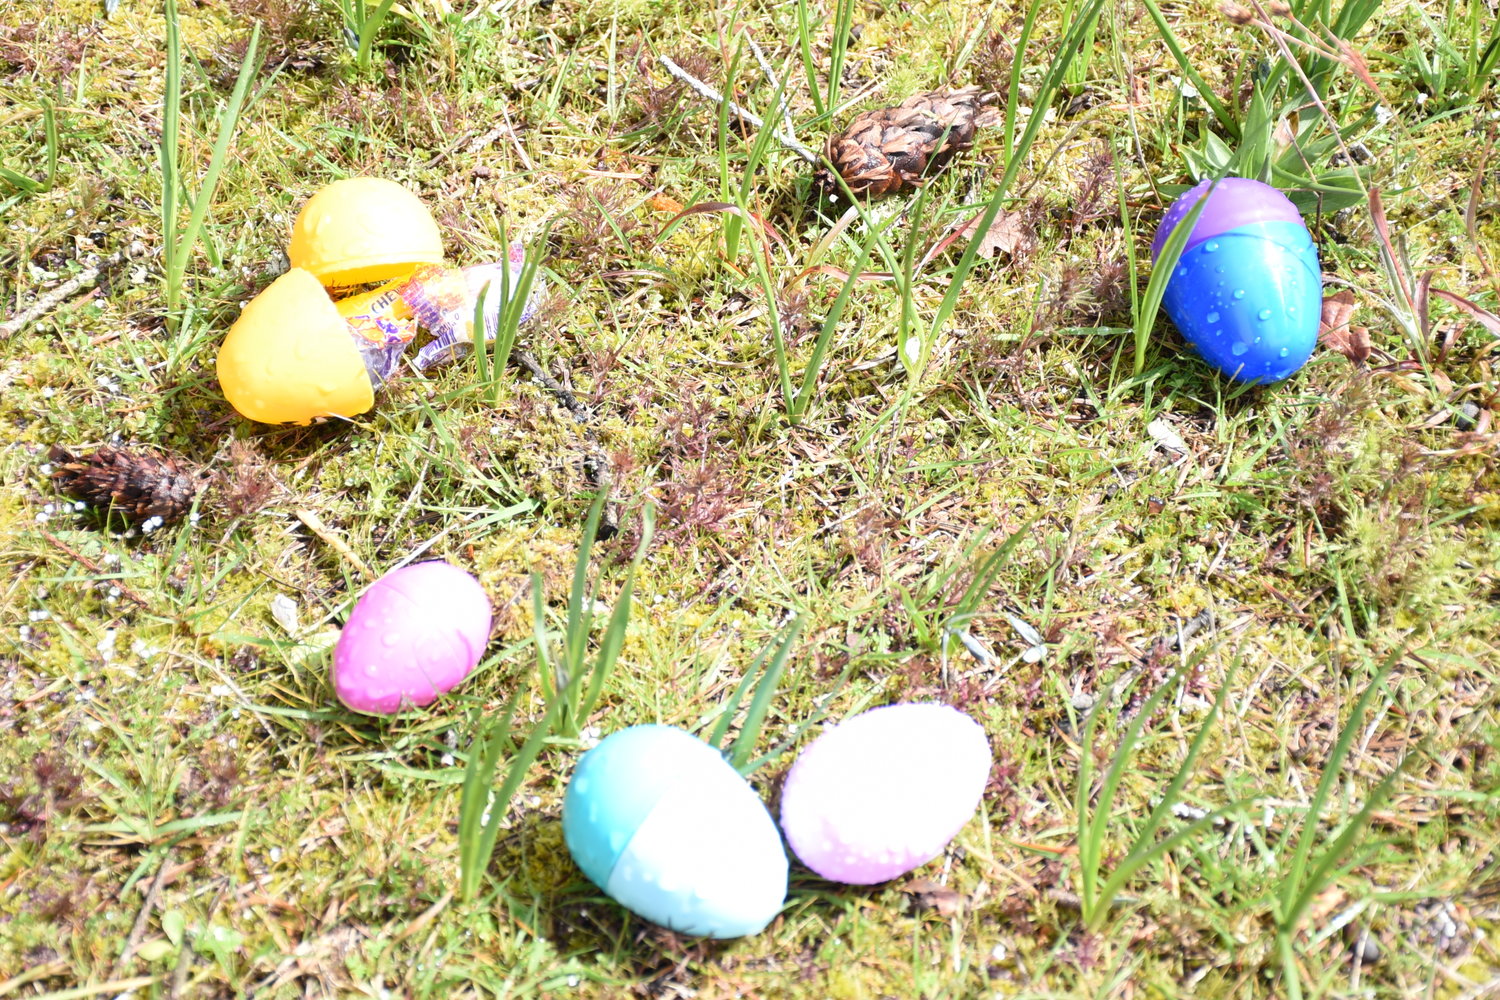 Tickets for over $1,000 in prizes were stuffed into eggs before an adult Easter egg hunt in Rainier’s Wilkowski Park Saturday.